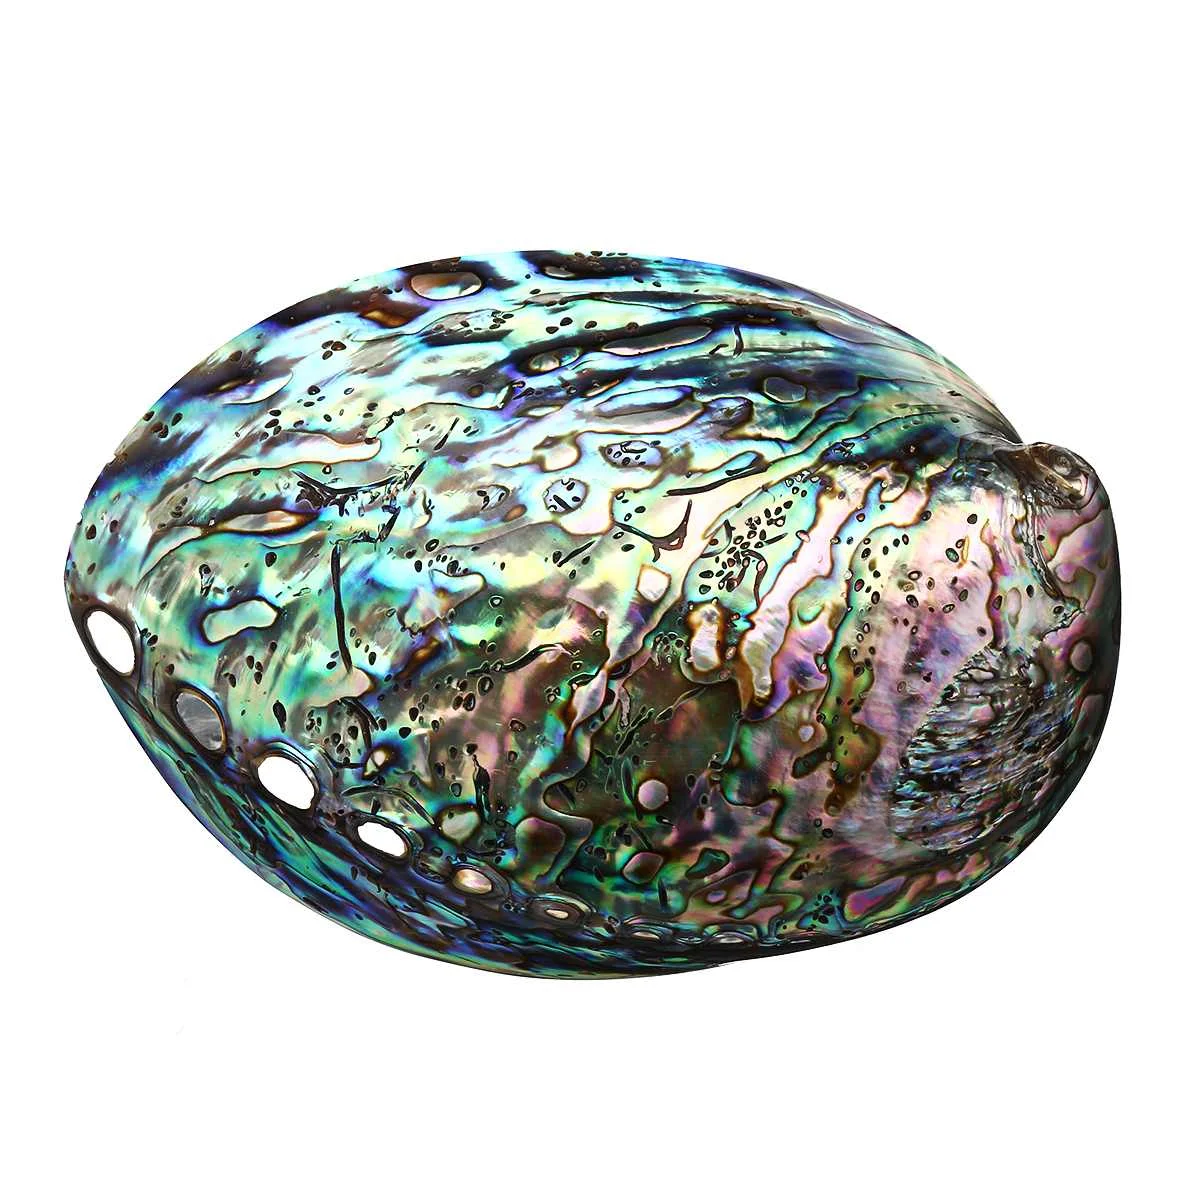 

10-12cm Natural Oyster Paua Abalone Shell Colorful Mother of Pearl Shell DIY Handmade Seashell Conch Home Decoration 2019 New